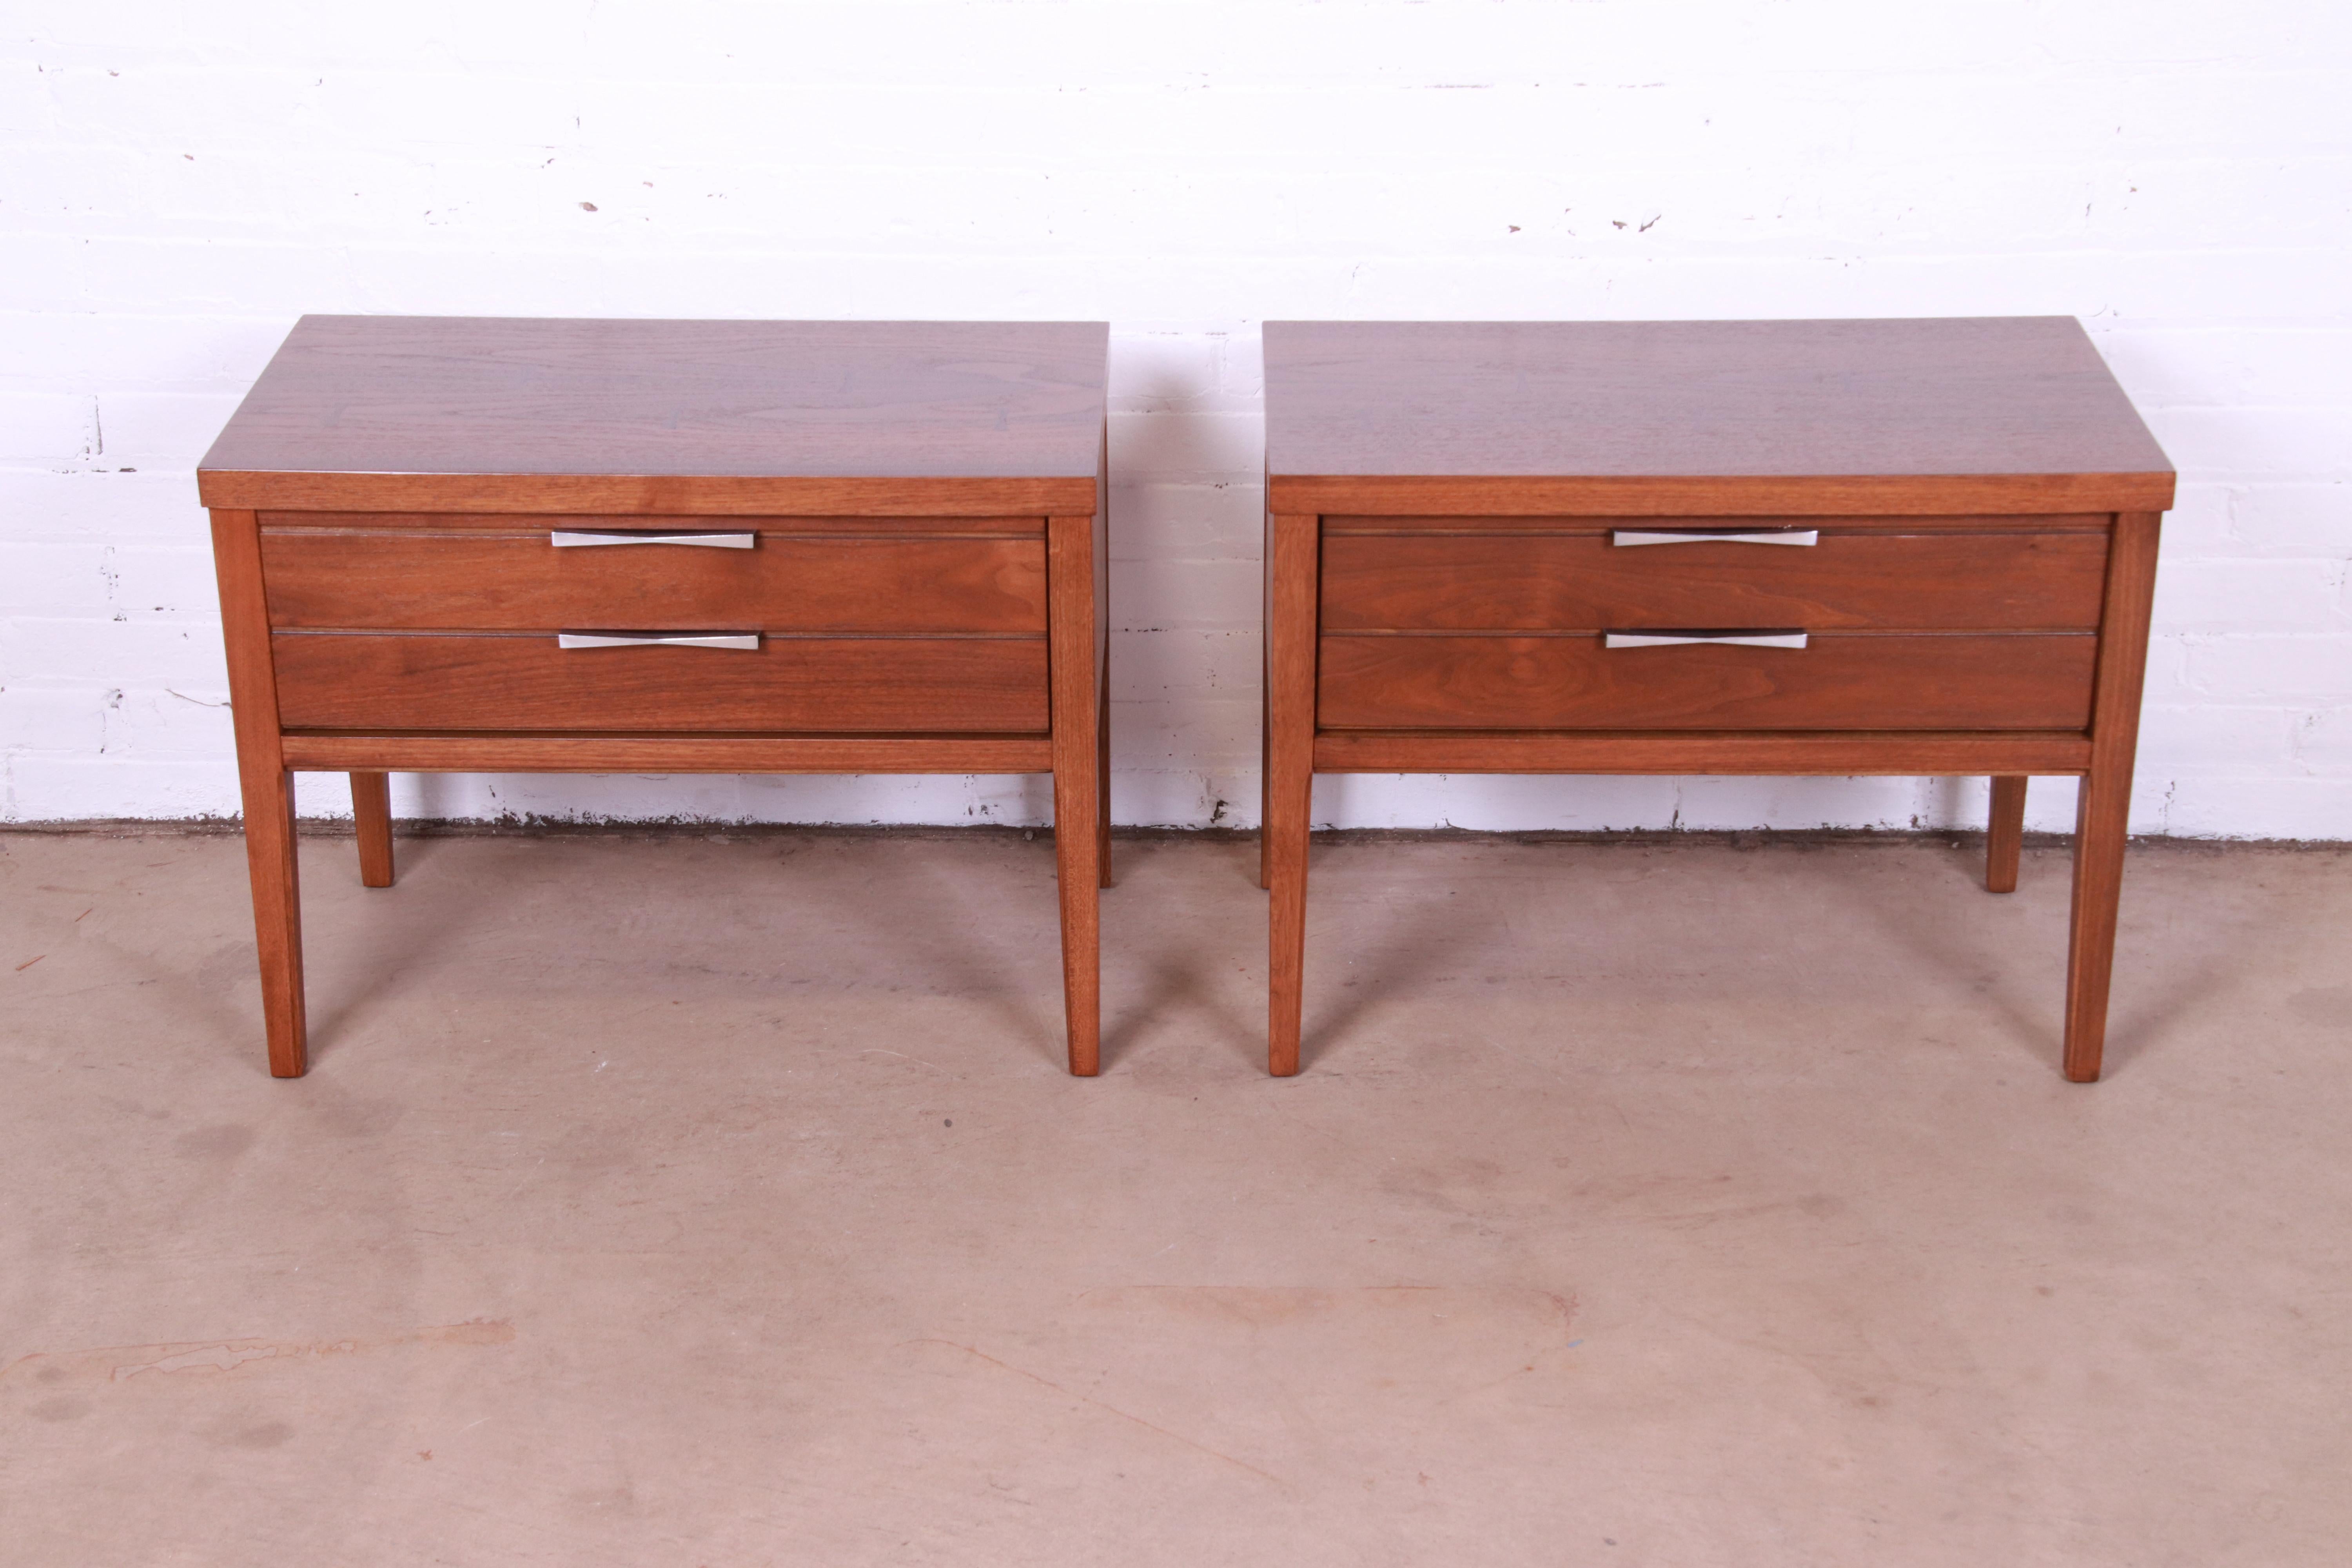 An exceptional pair of mid-century modern nightstands or side tables

In the style of Paul McCobb

By Lane Furniture, 